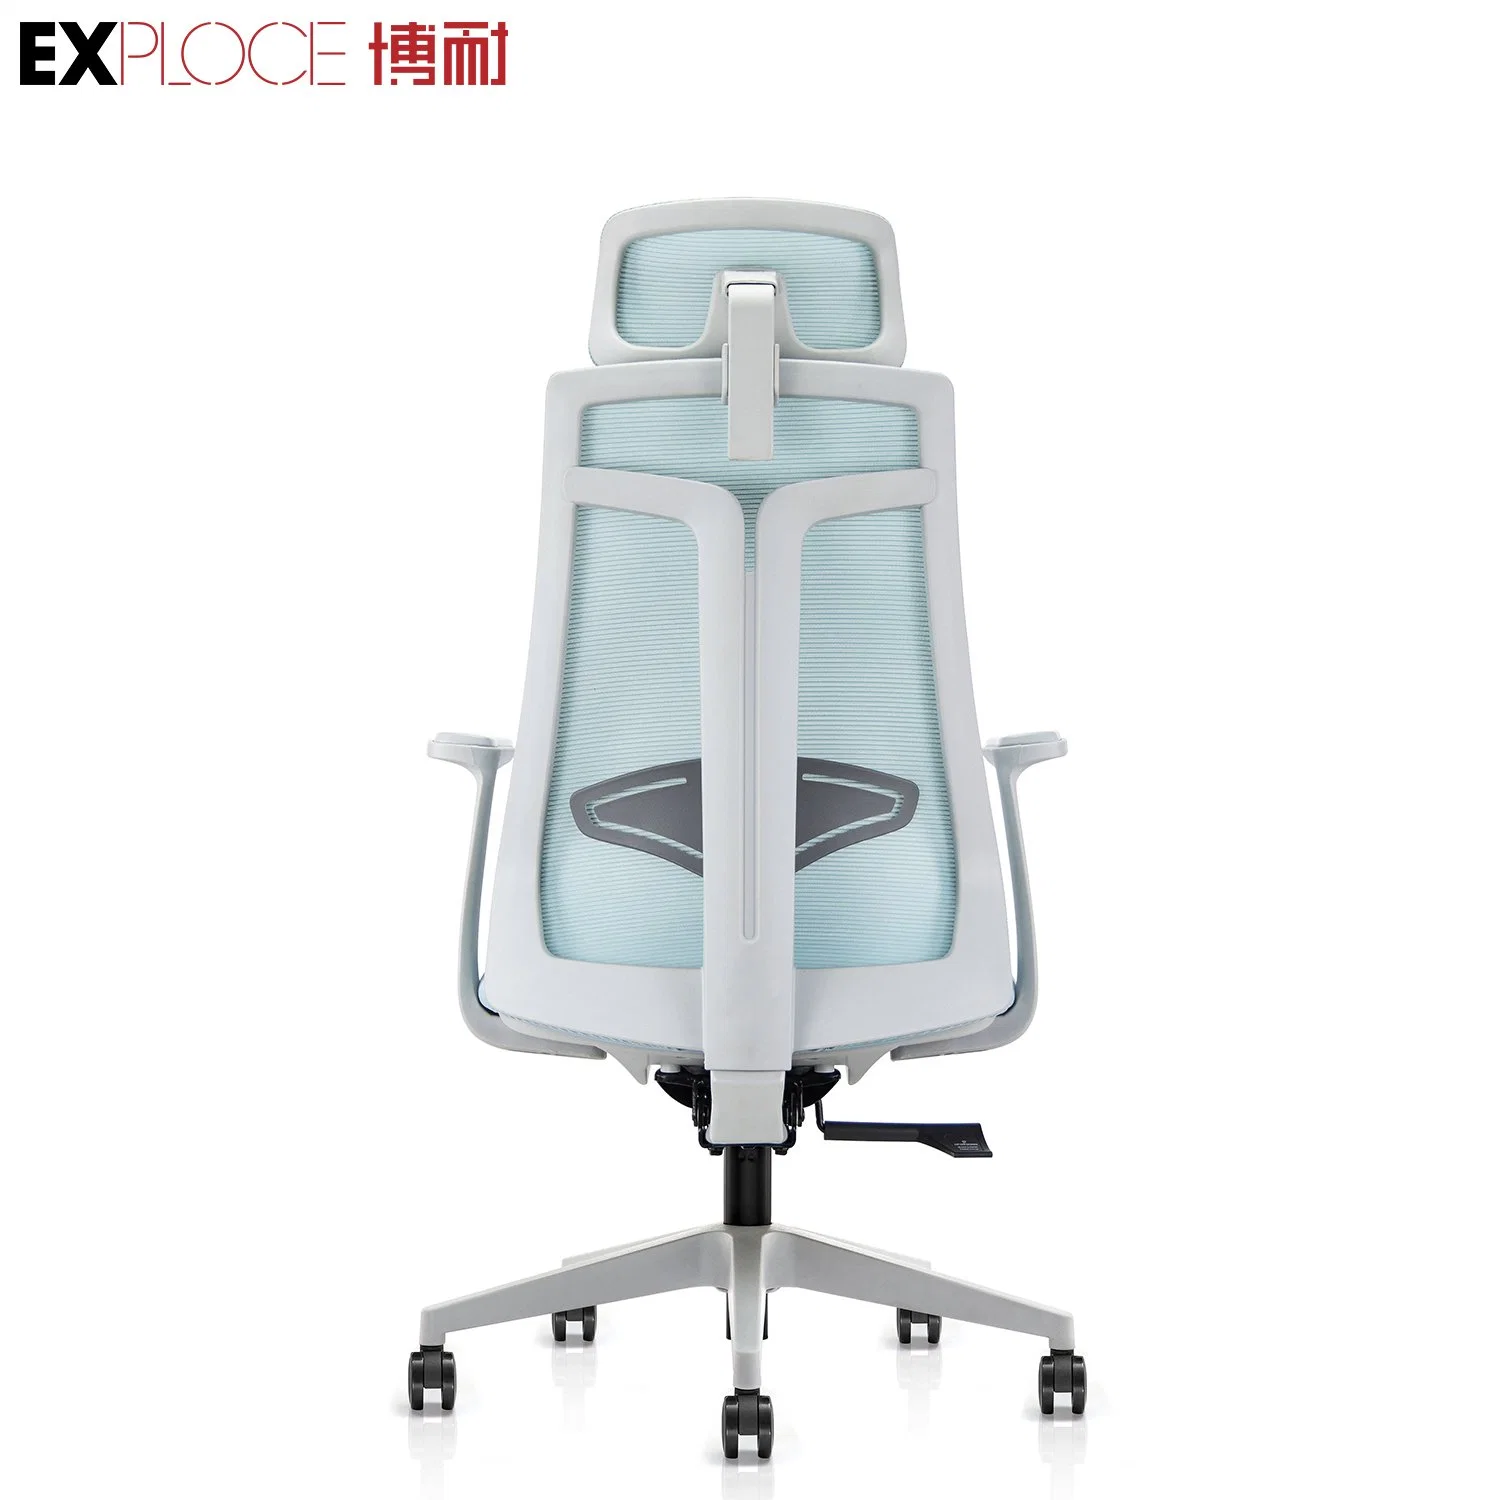 Home Work Office Classic Manufacturer High Back Mesh Chair Price Fixed Armrest Office Mesh Chairs Modern Design Furniture